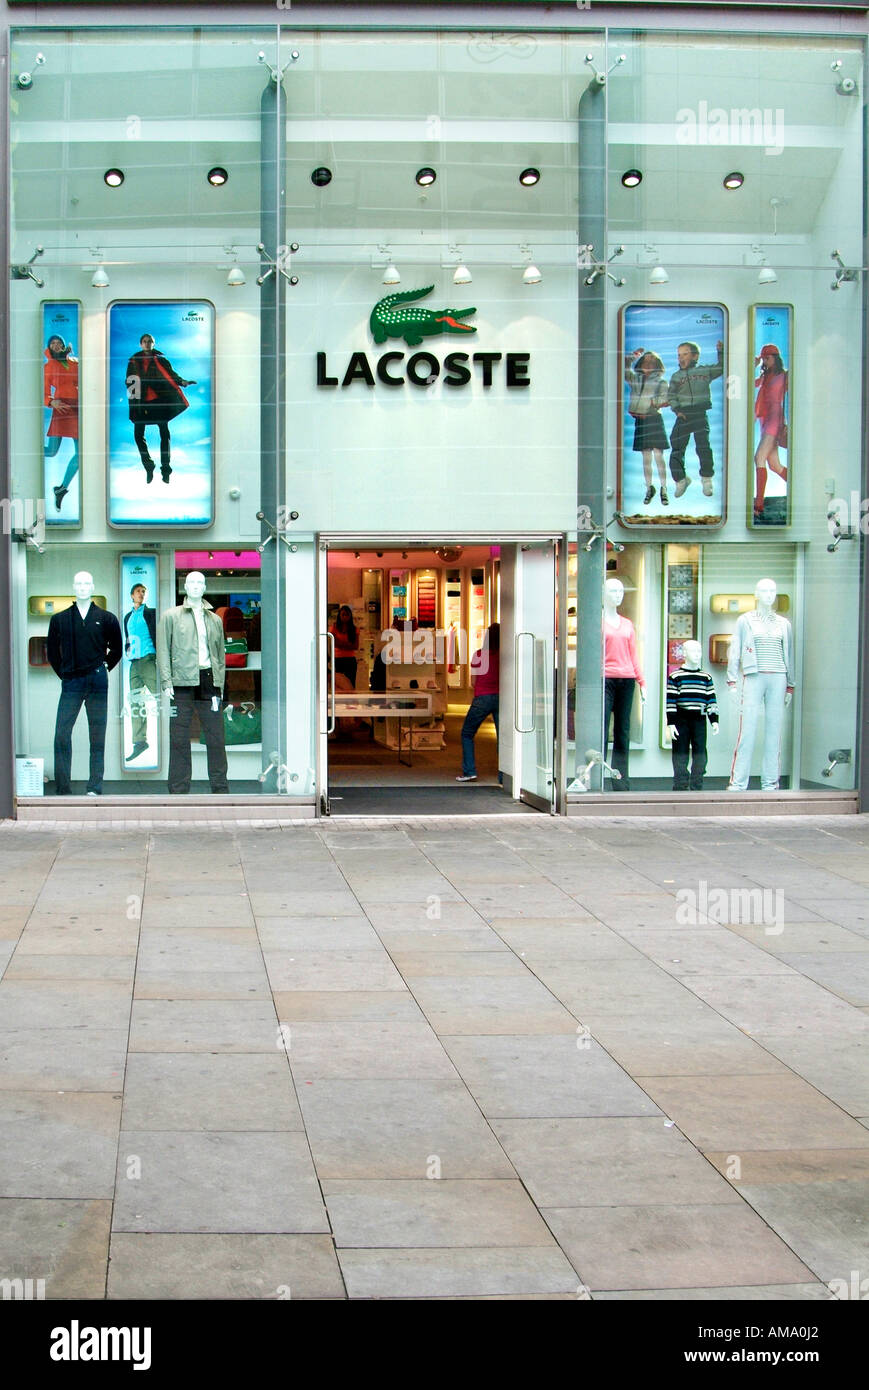 lacoste uk stores, OFF 78%,Buy!